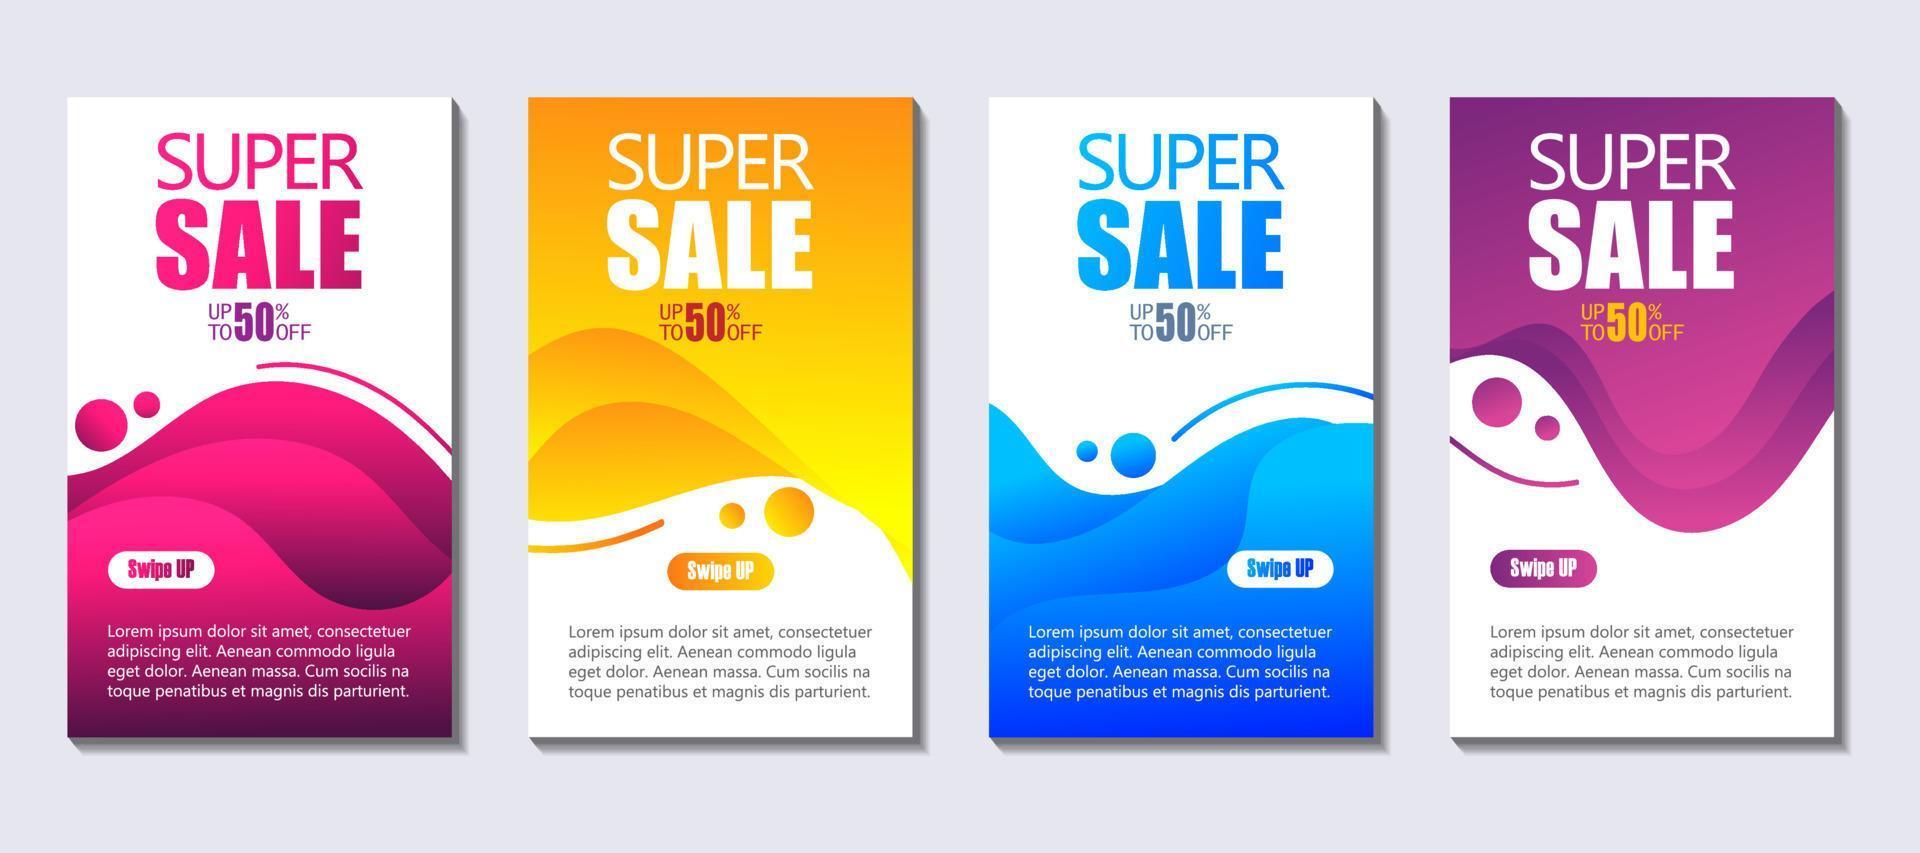 Modern Fluid For Super Sale Banners Design. Discount Banner Promotion Template. Abstract fluid background. Super Sale Banner. vector